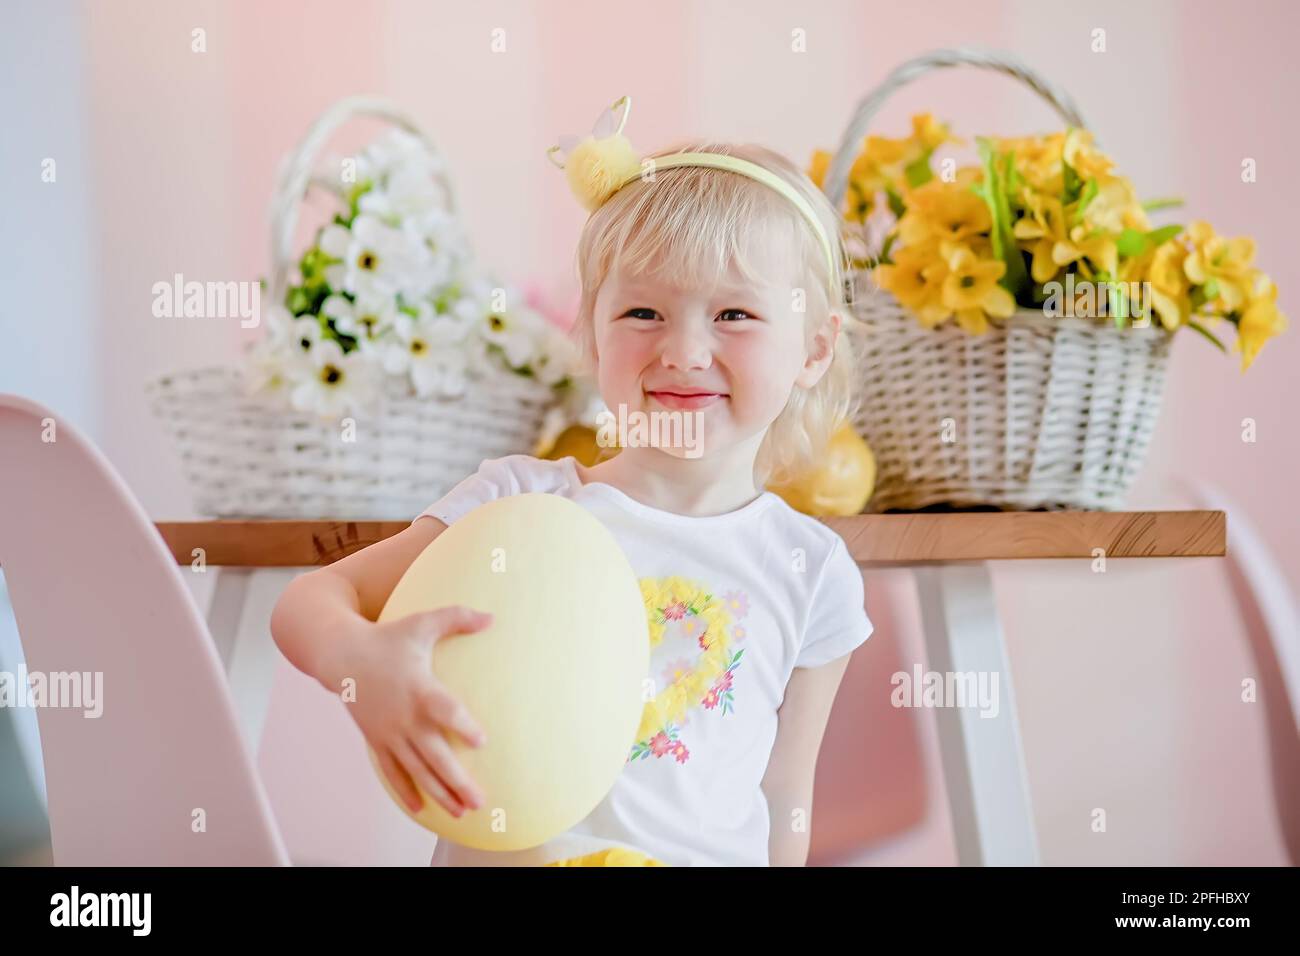 Easter egg hunt at home. Adorable happy little blonde girl with short hair in a white dress holding a huge painted Easter egg. Stock Photo